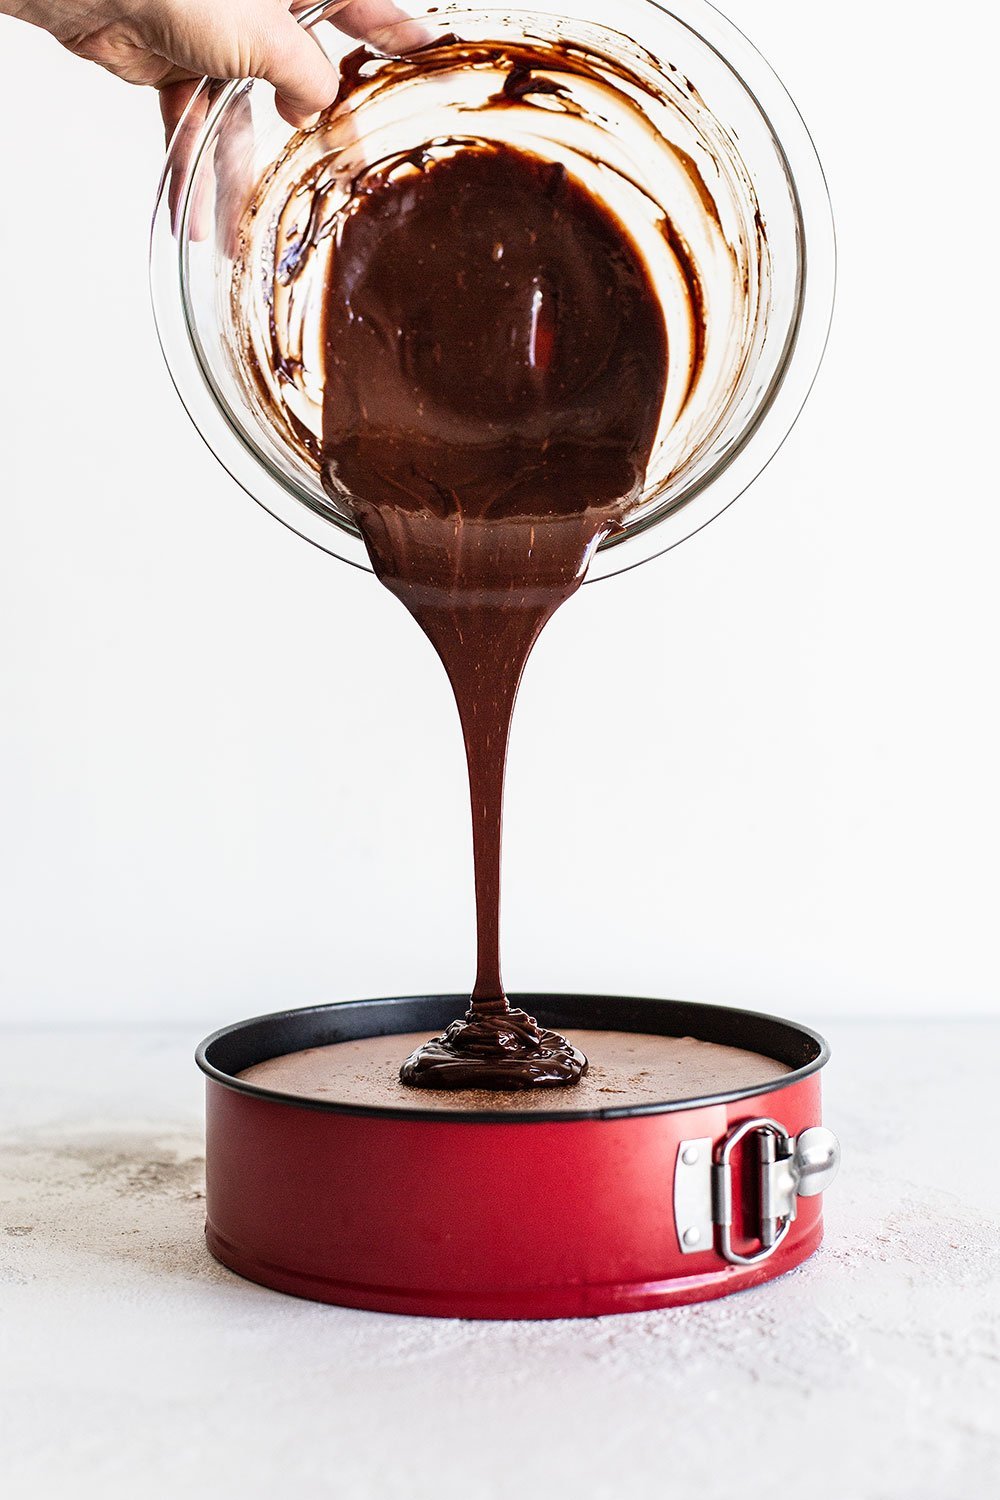 Chocolate ganache being poured onto chocolate peppermint cheesecake